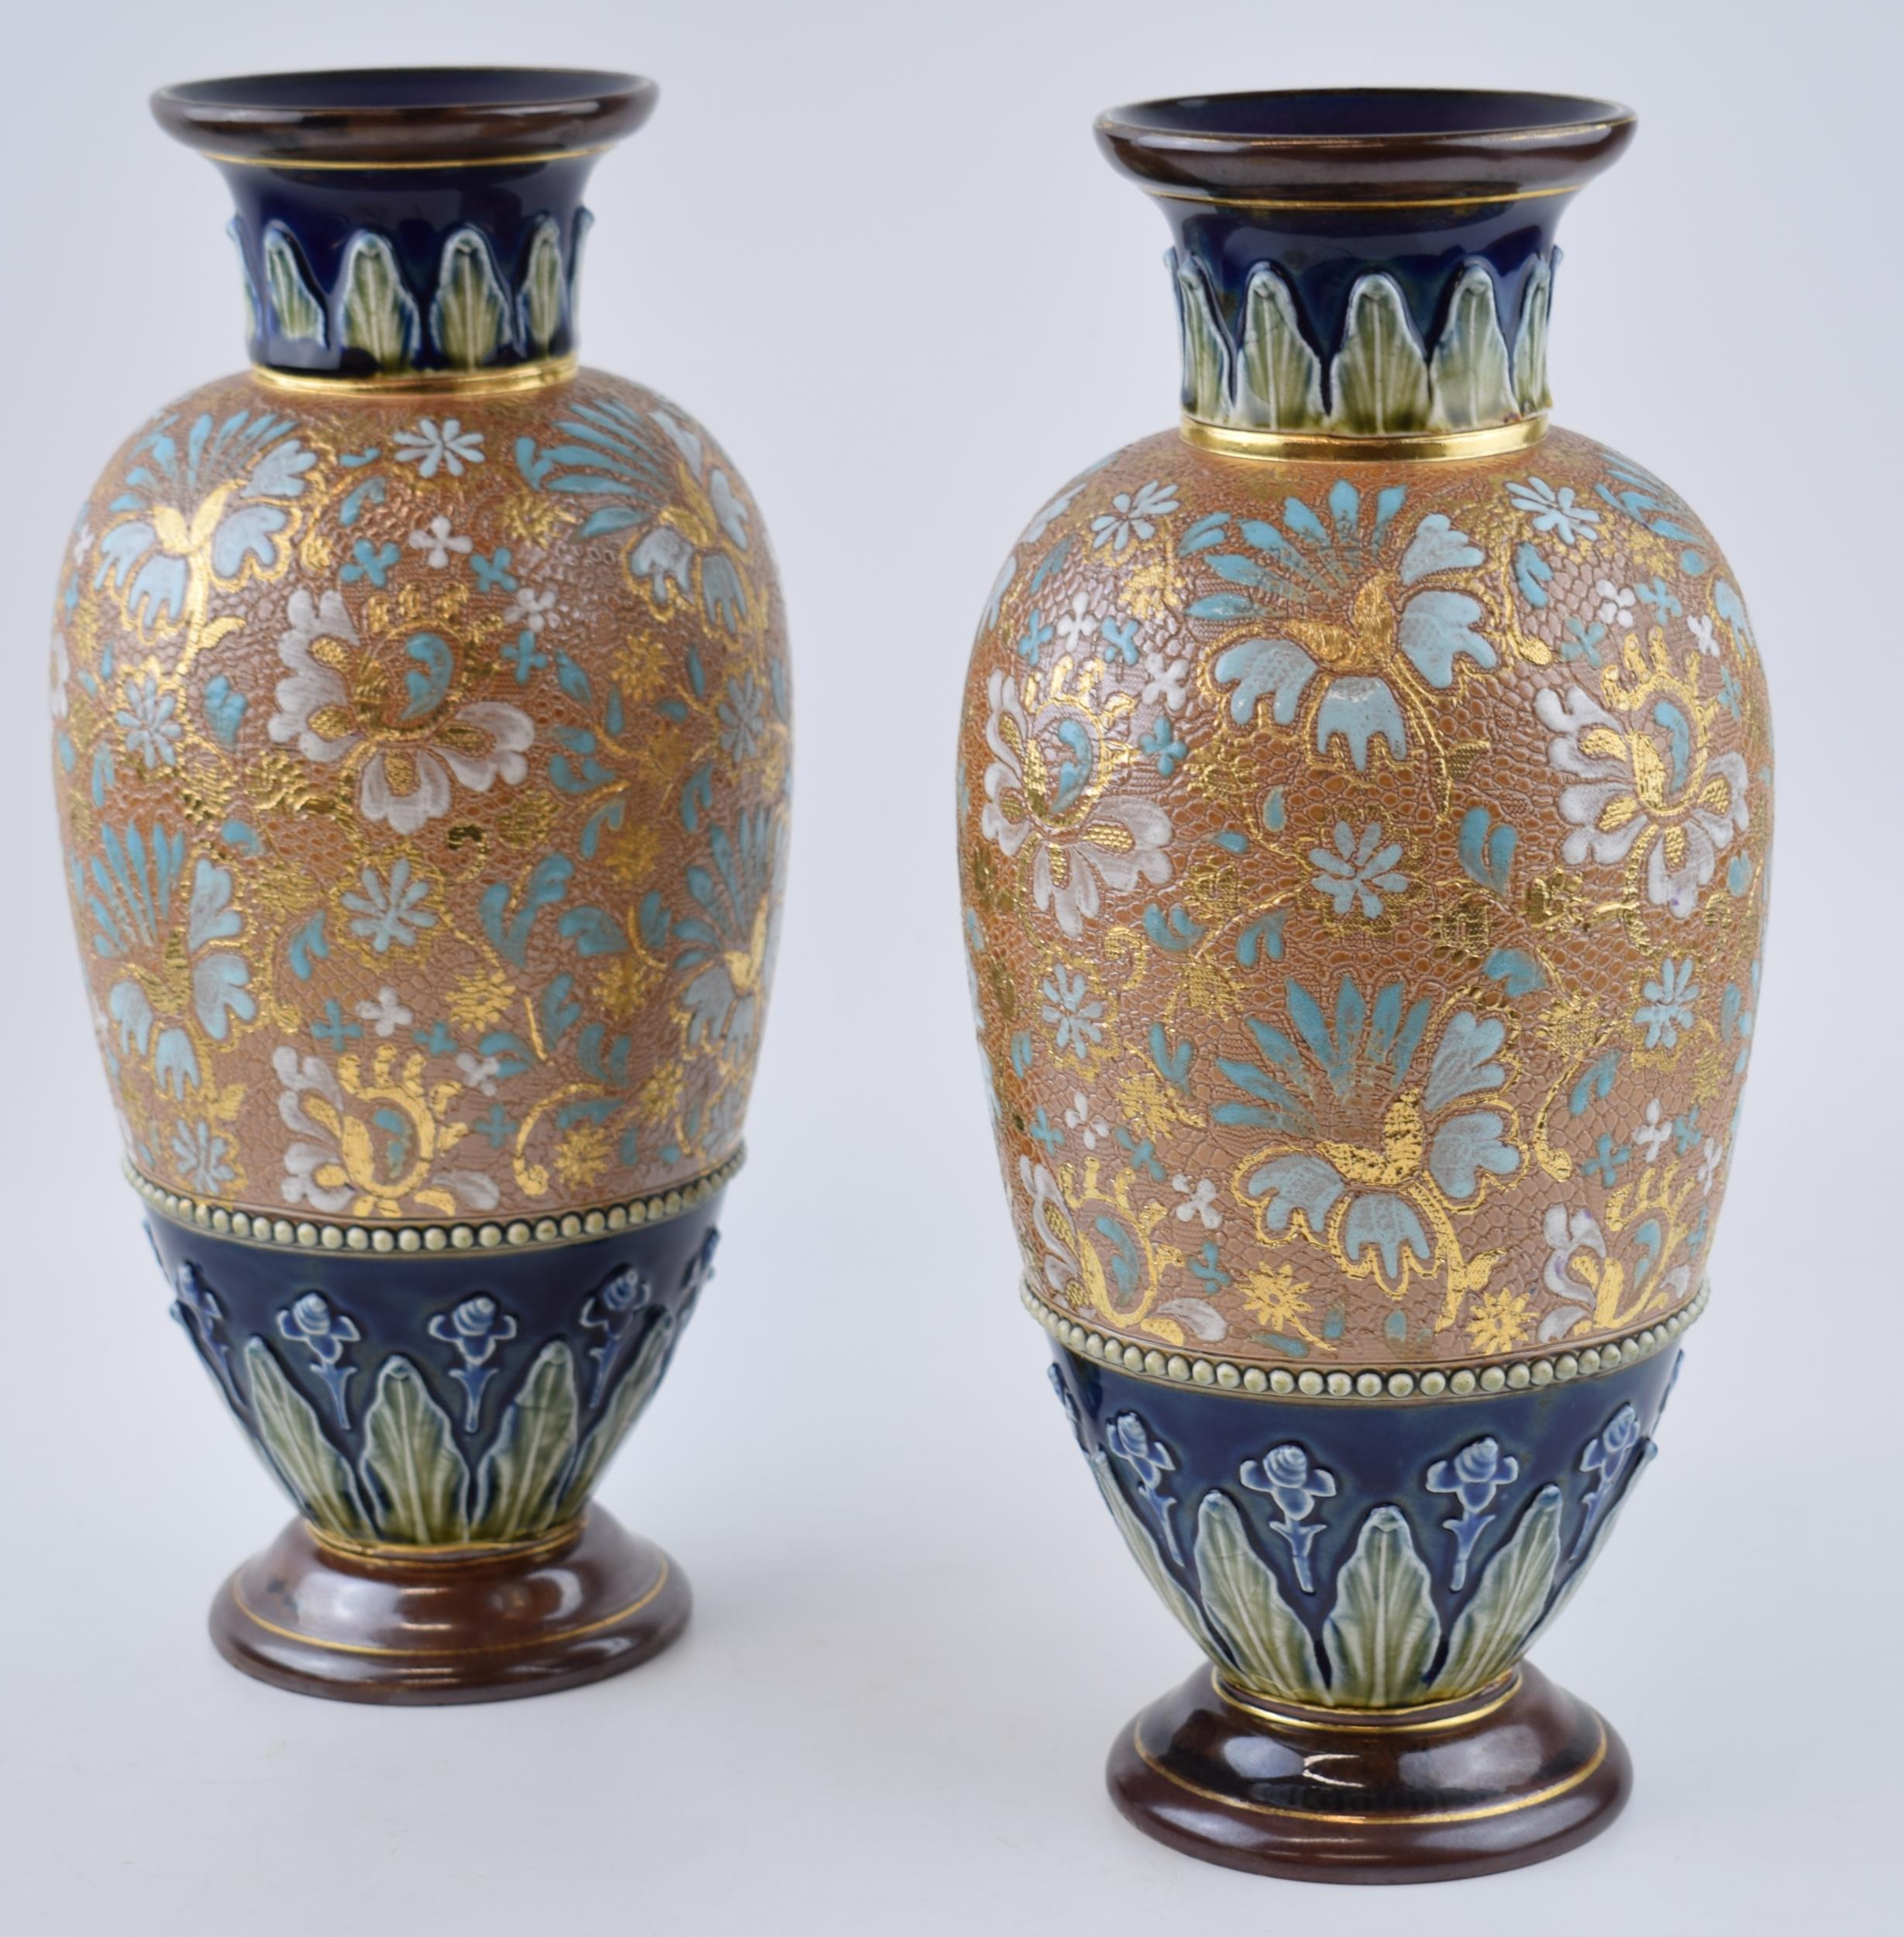 A pair of Doulton Lambeth & Slaters patent stoneware vases, with floral decoration, artists